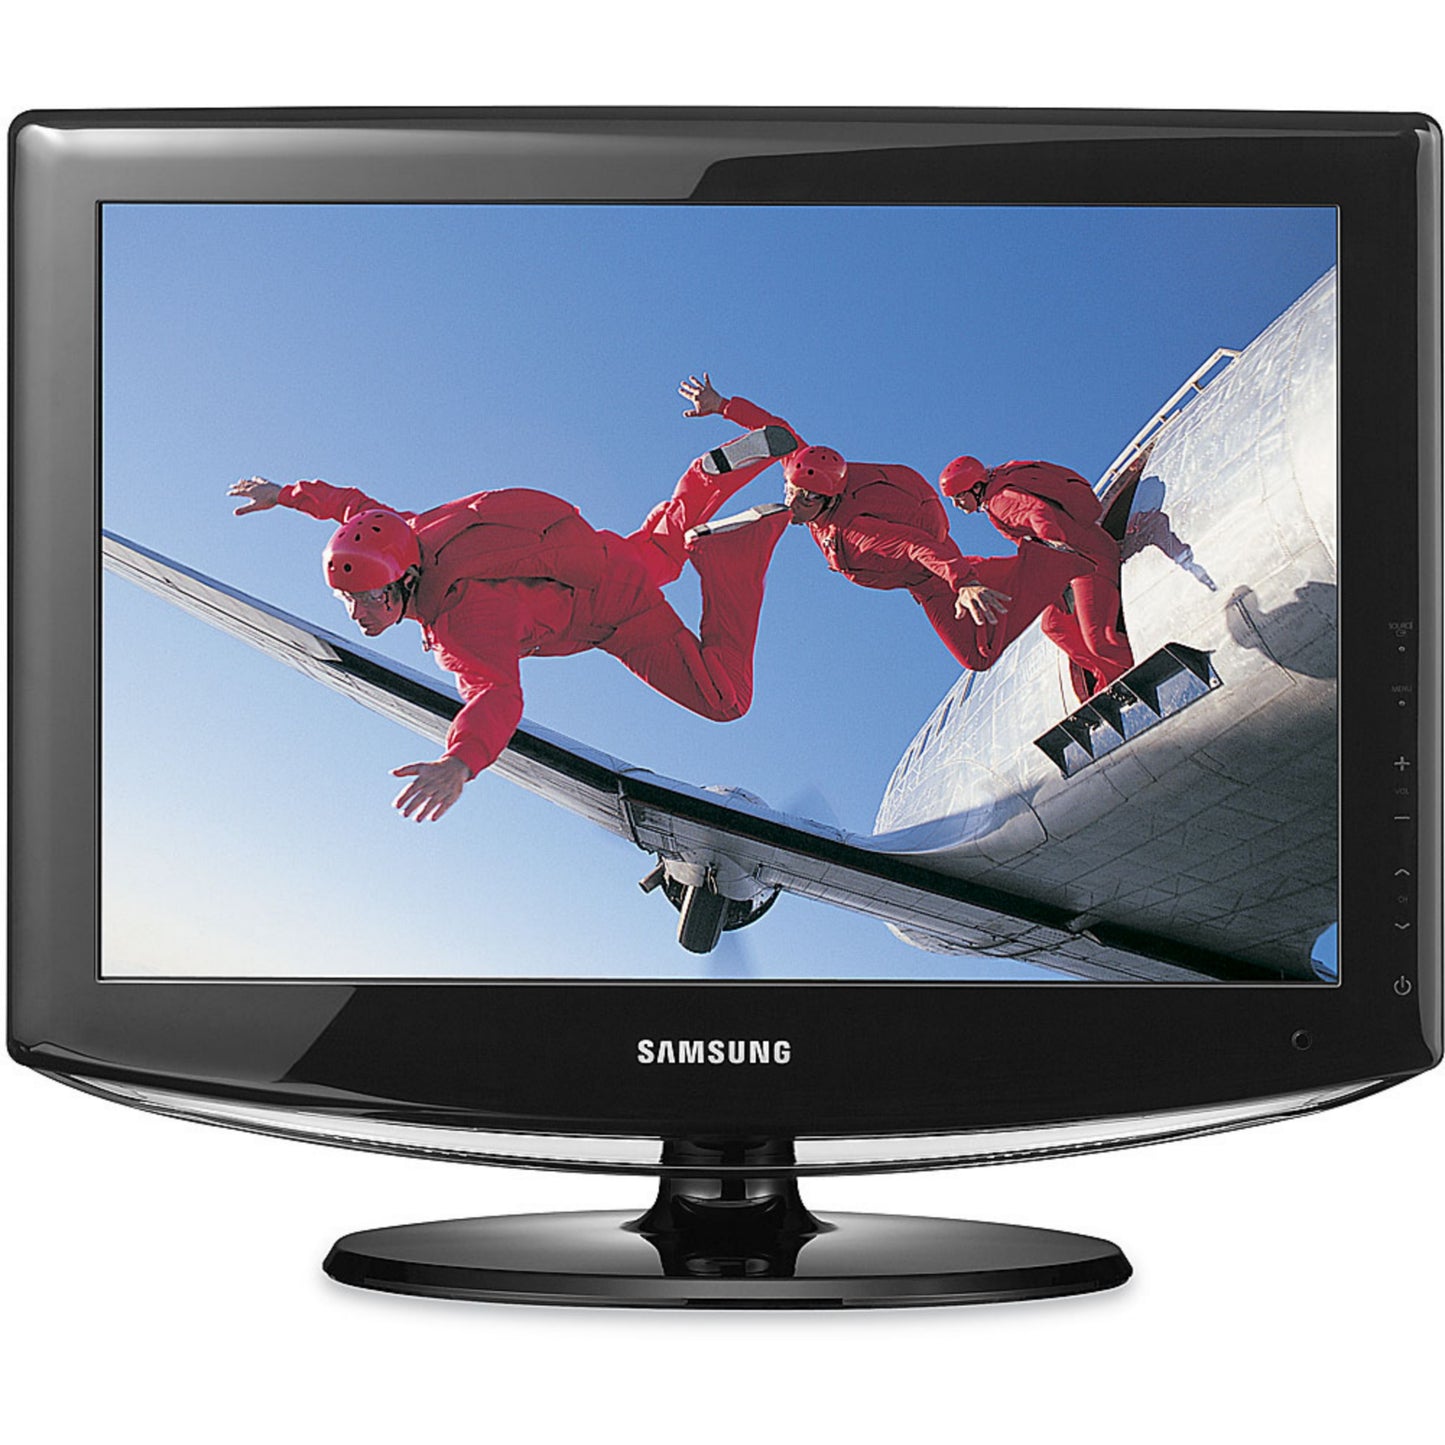 SAMSUNG 19 Inch LE19R86BD LCD TV - London Used